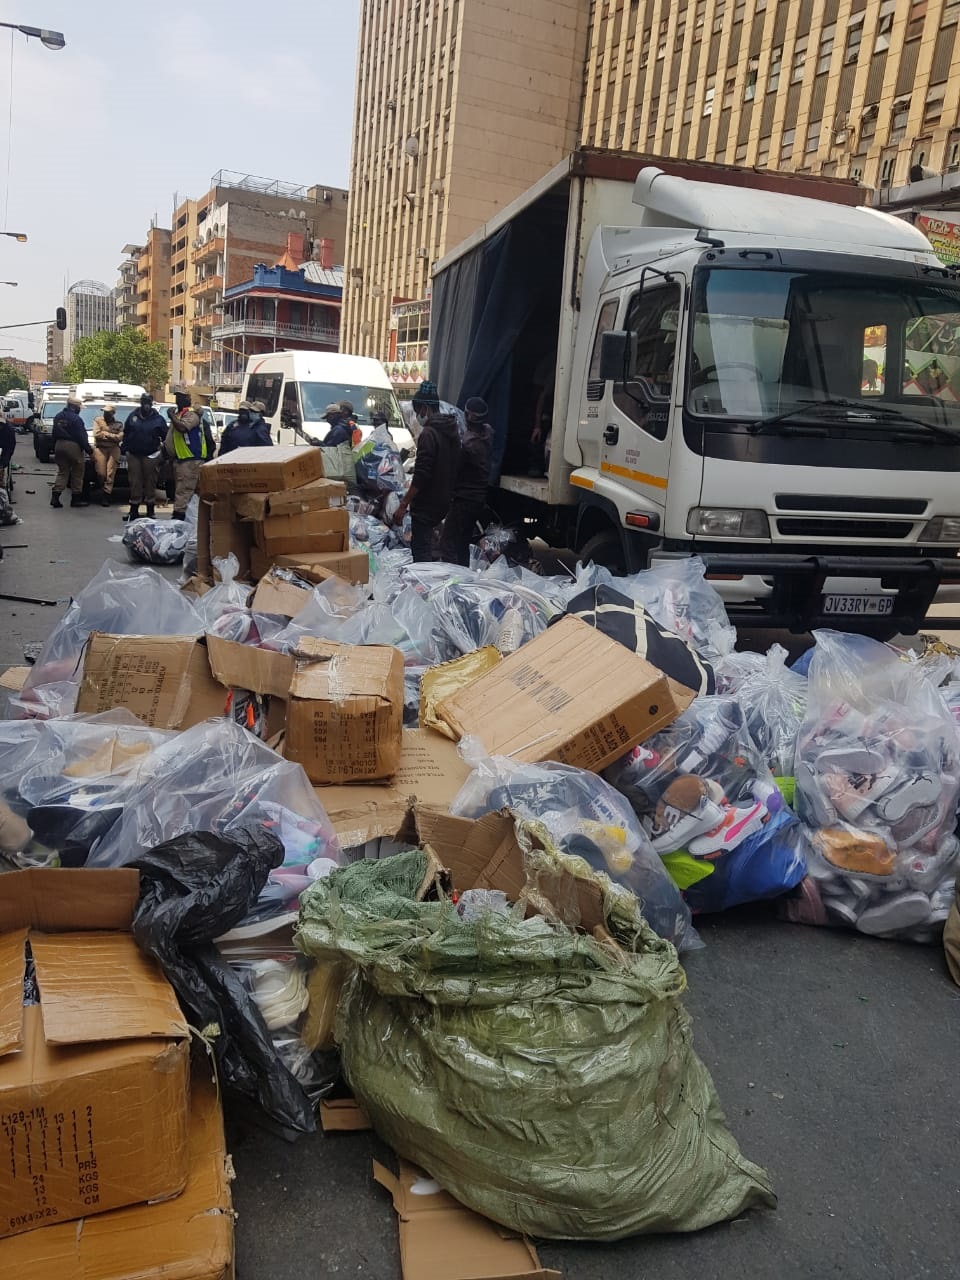 Fong kong goods were confiscated in Joburg. 